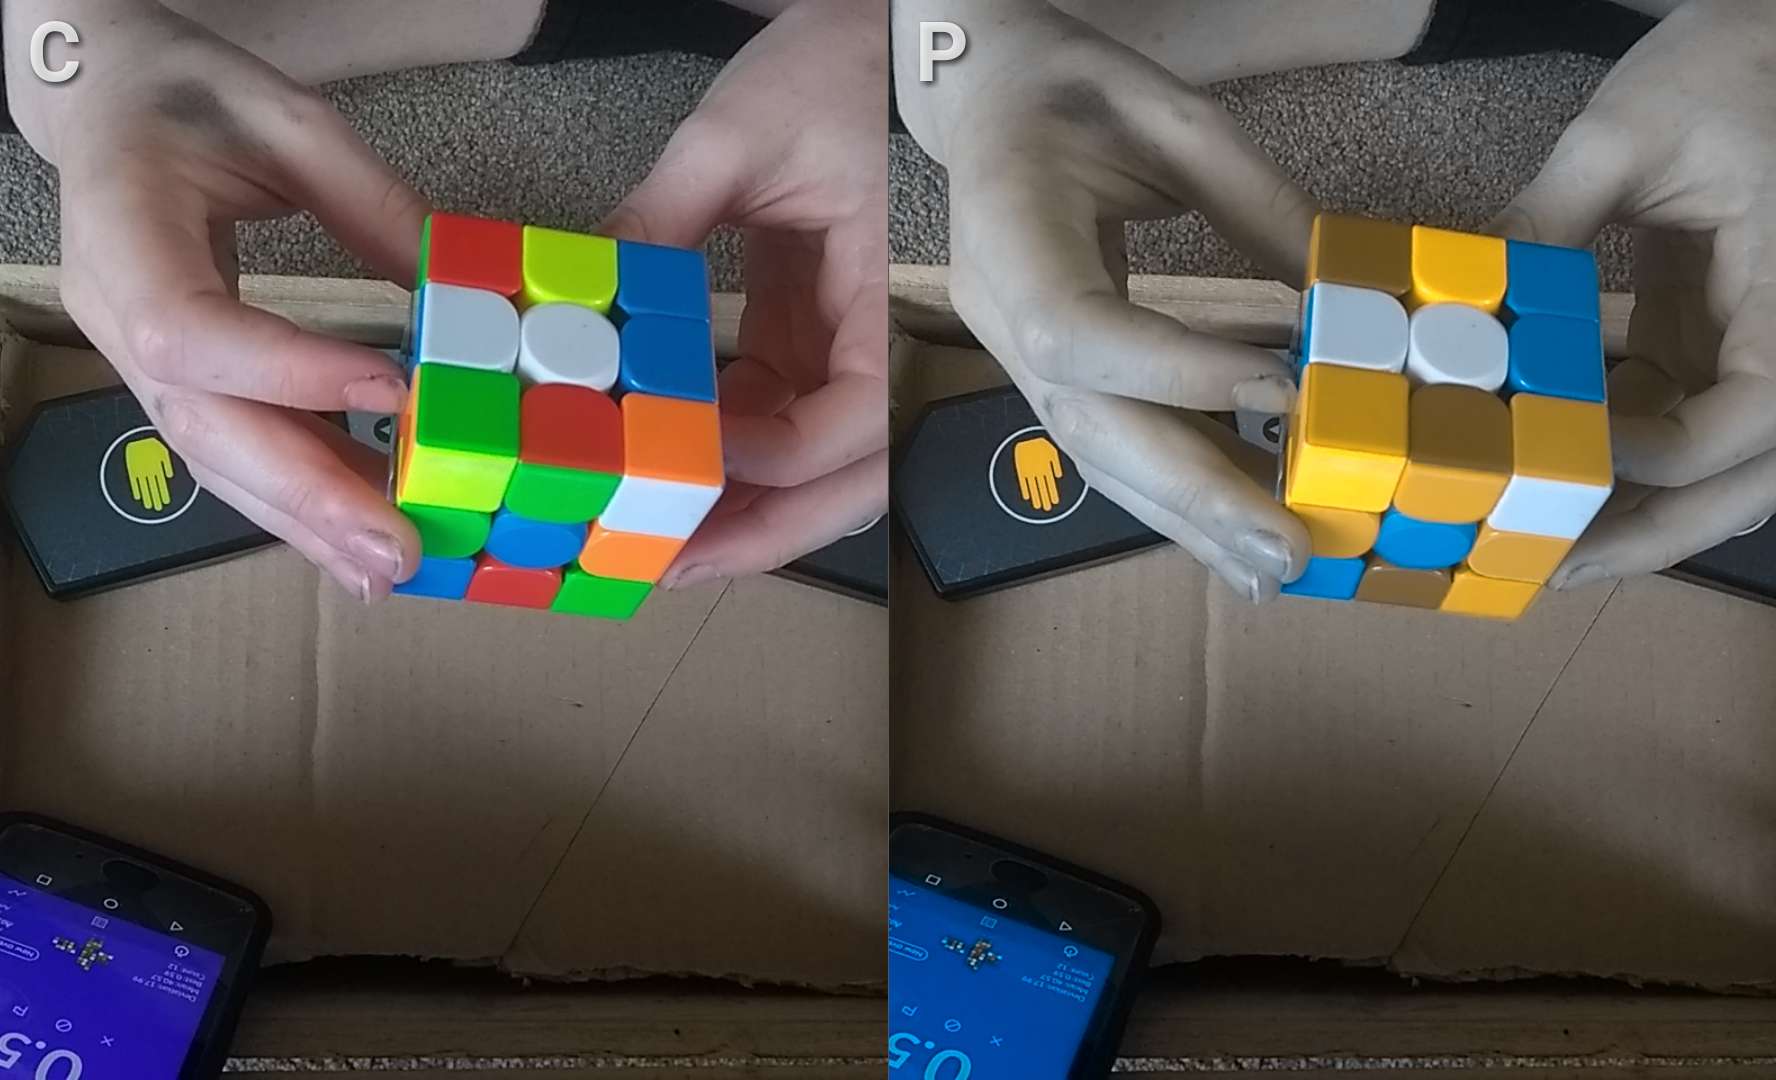 Malachi is holding a coloured cube. On the left shows how someone without colour blindness would see the colours of the cube, and on the right is how someone with colour blindness like Malachi's would see the cube colours.